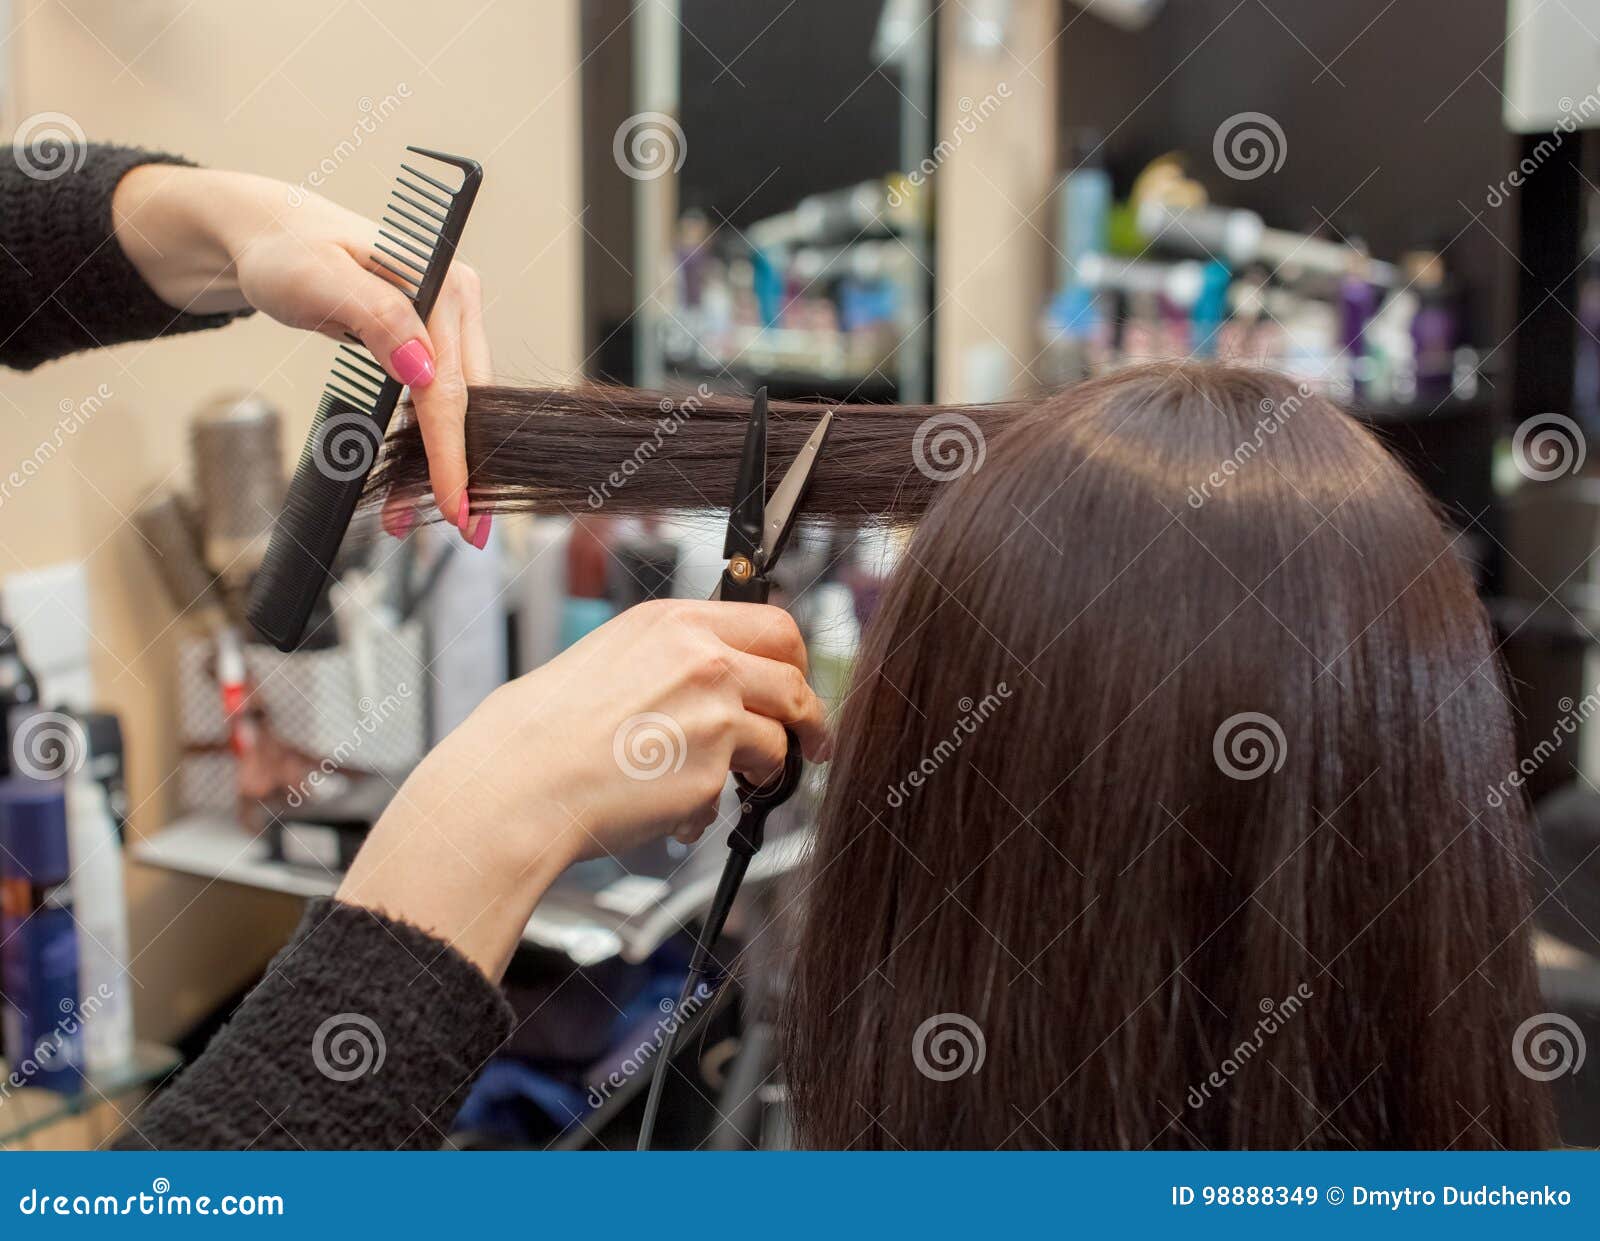 The Hairdresser Does A Haircut With Hot Scissors Of Hair To A